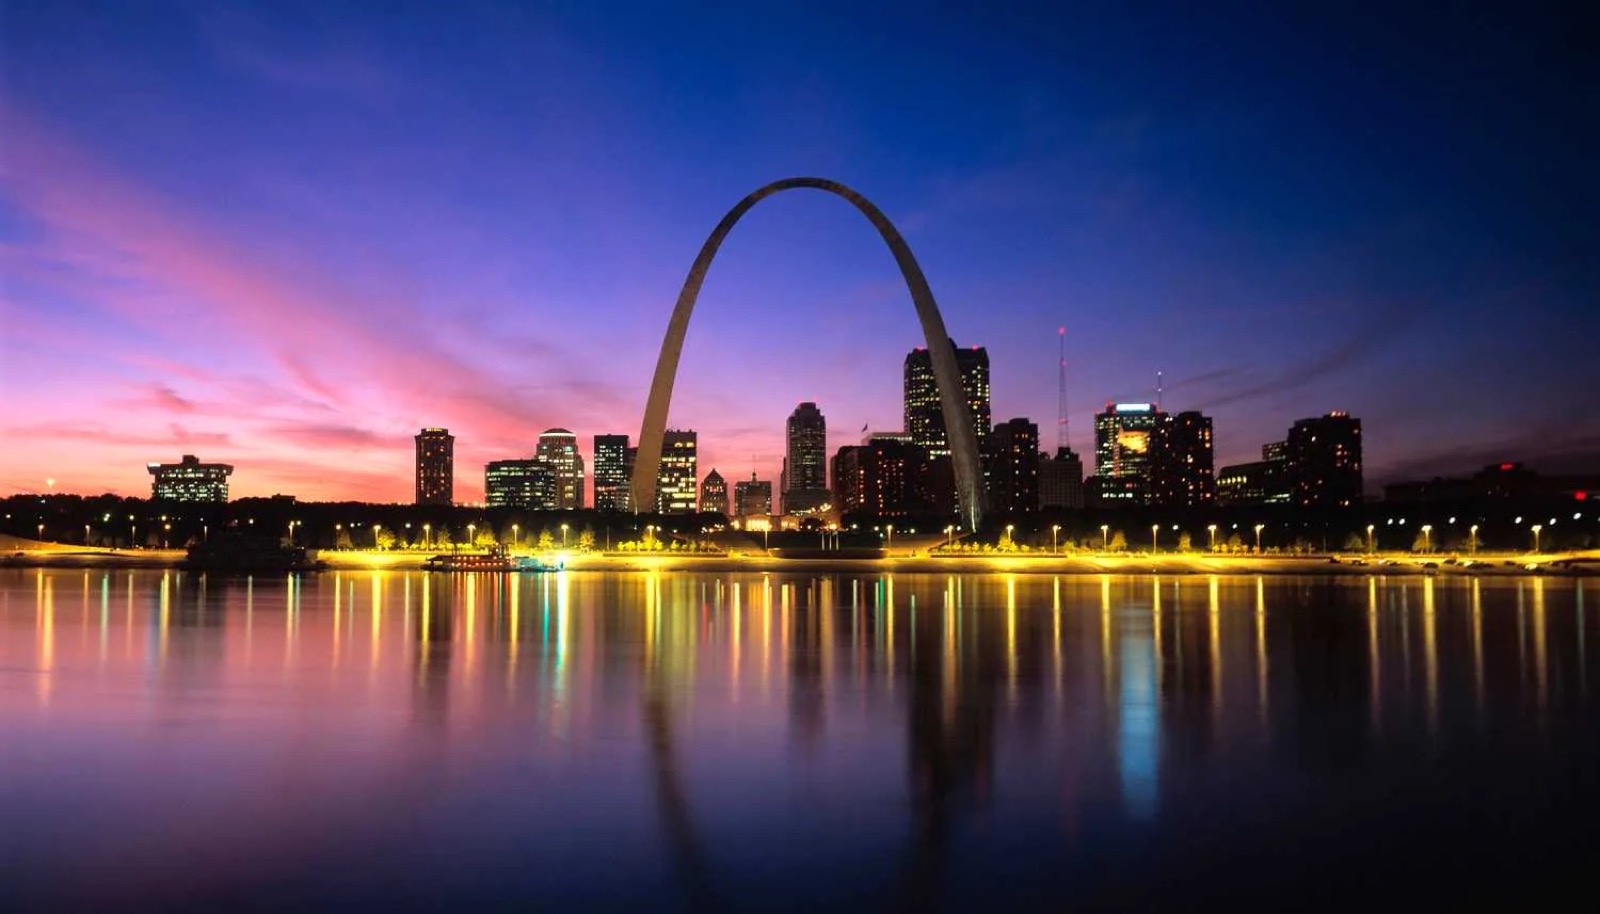 Do You Know a Little Bit About Everything When It Comes to Geography? St. Louis, Missouri